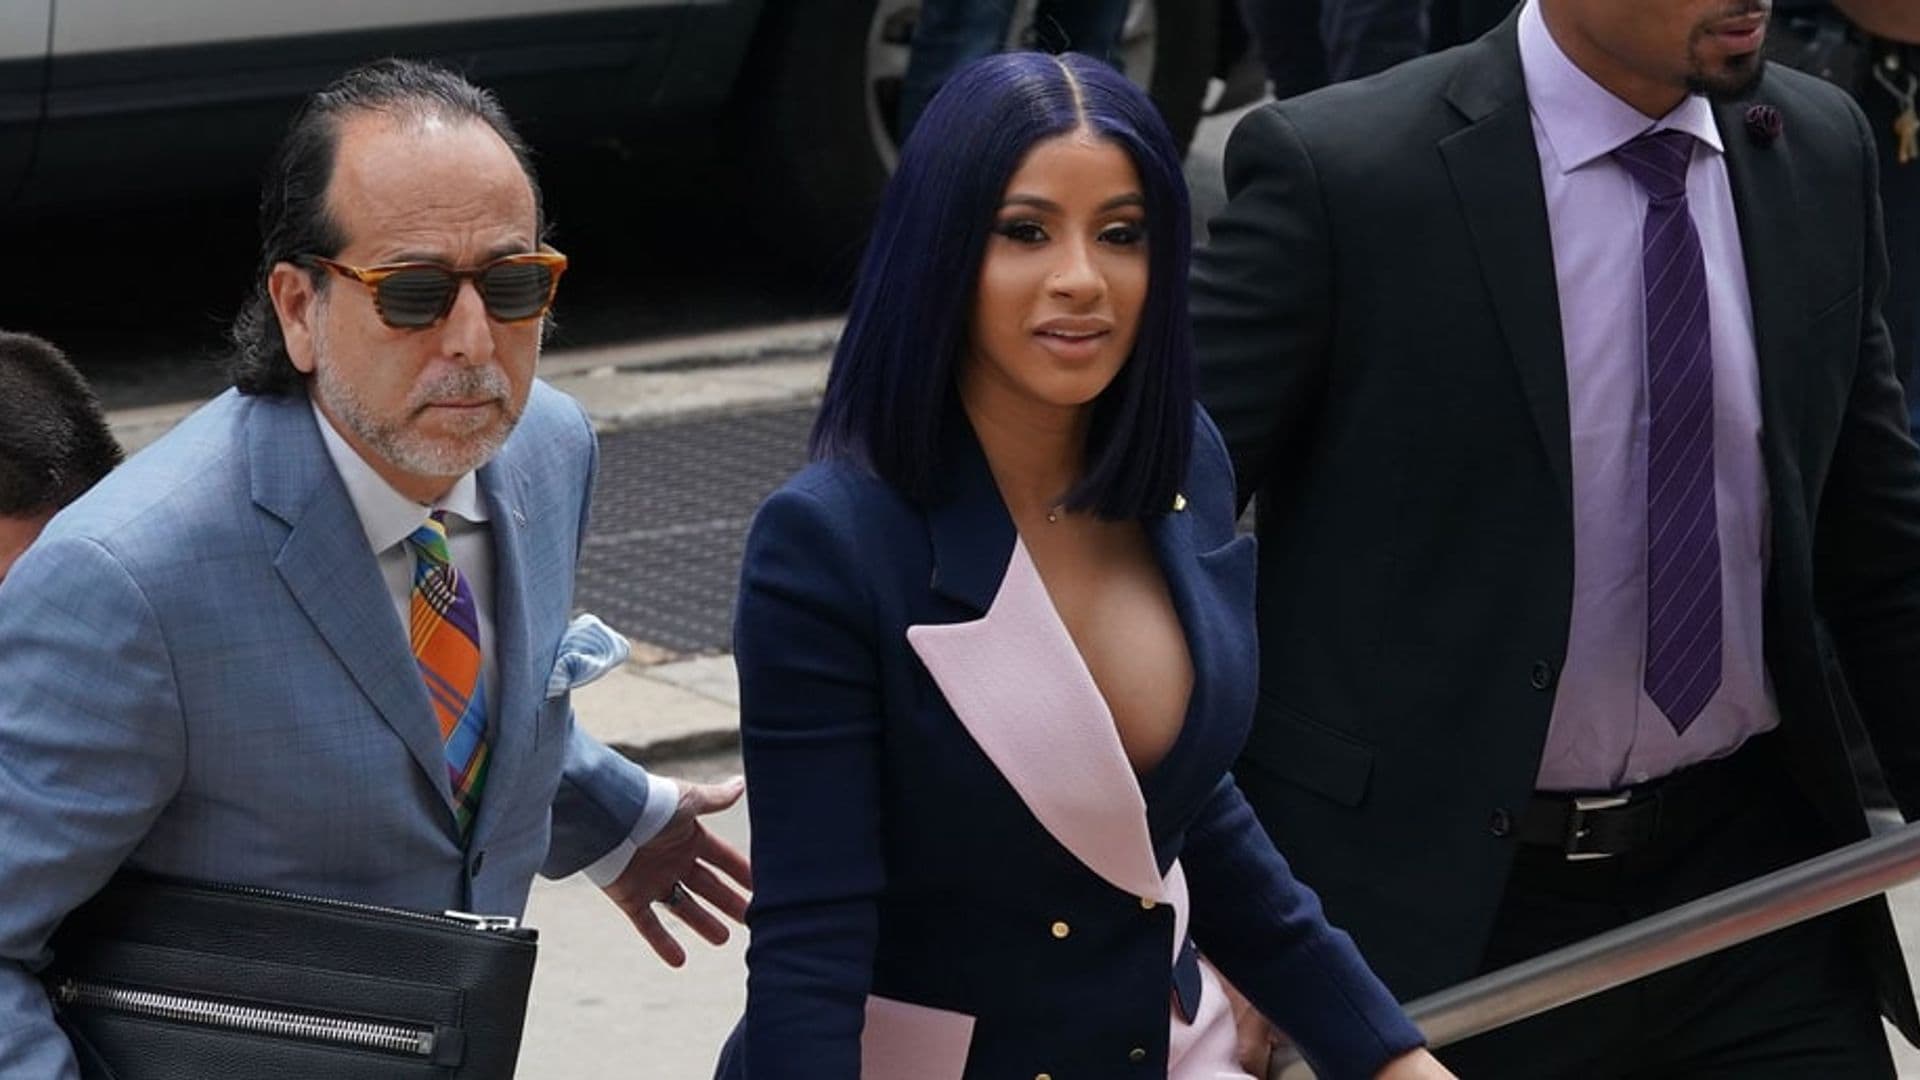 Cardi B heads to court in New York City, pleads not guilty